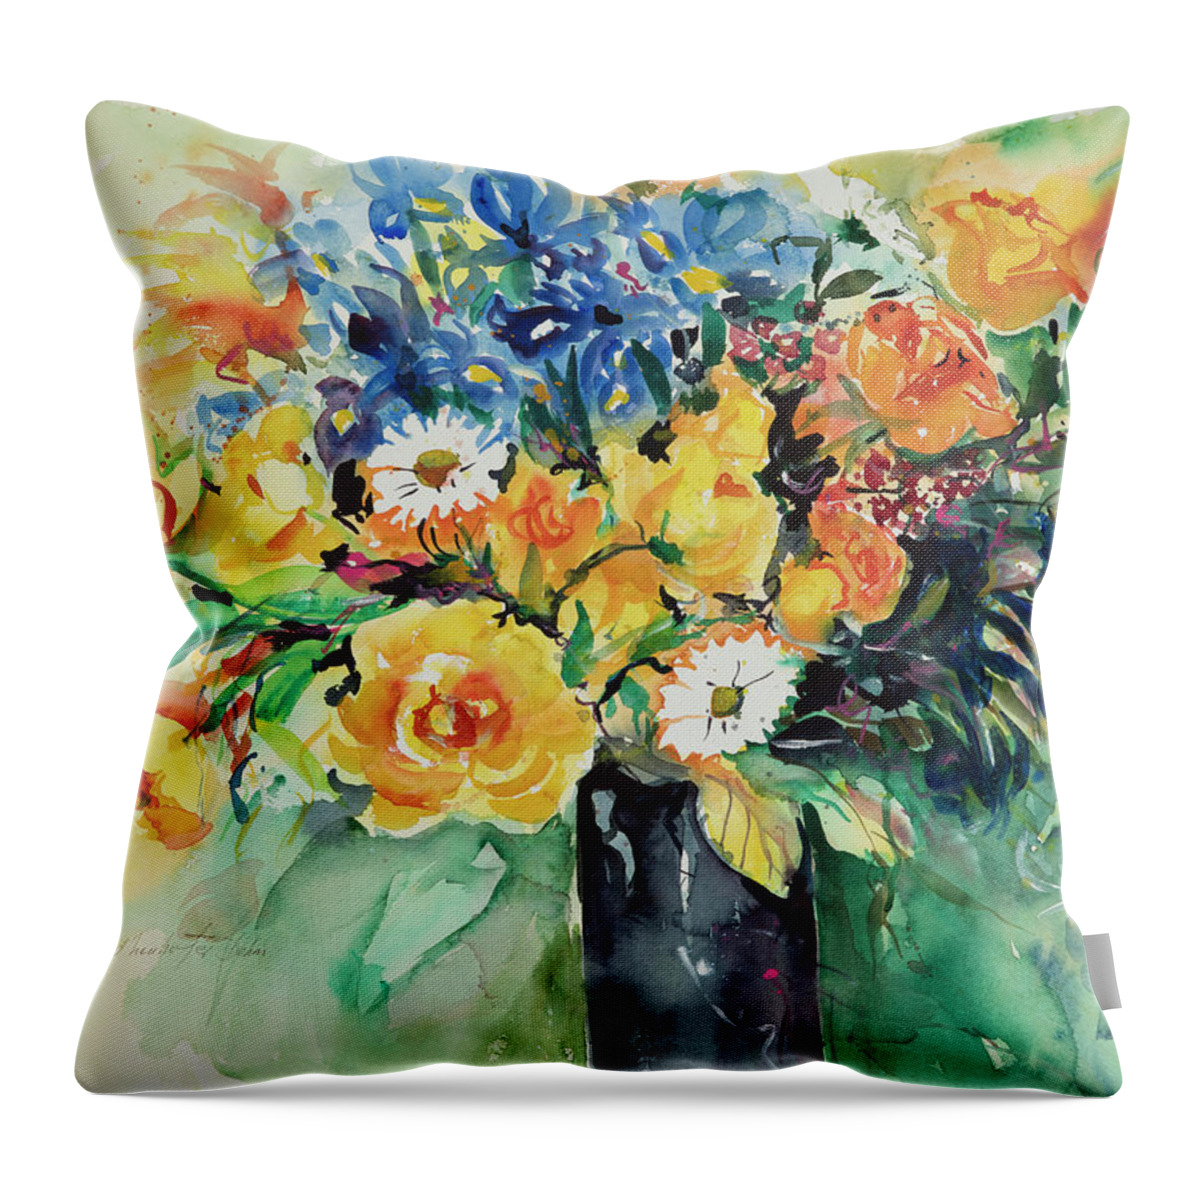 Floral Throw Pillow featuring the painting Watercolor Series 34 by Ingrid Dohm